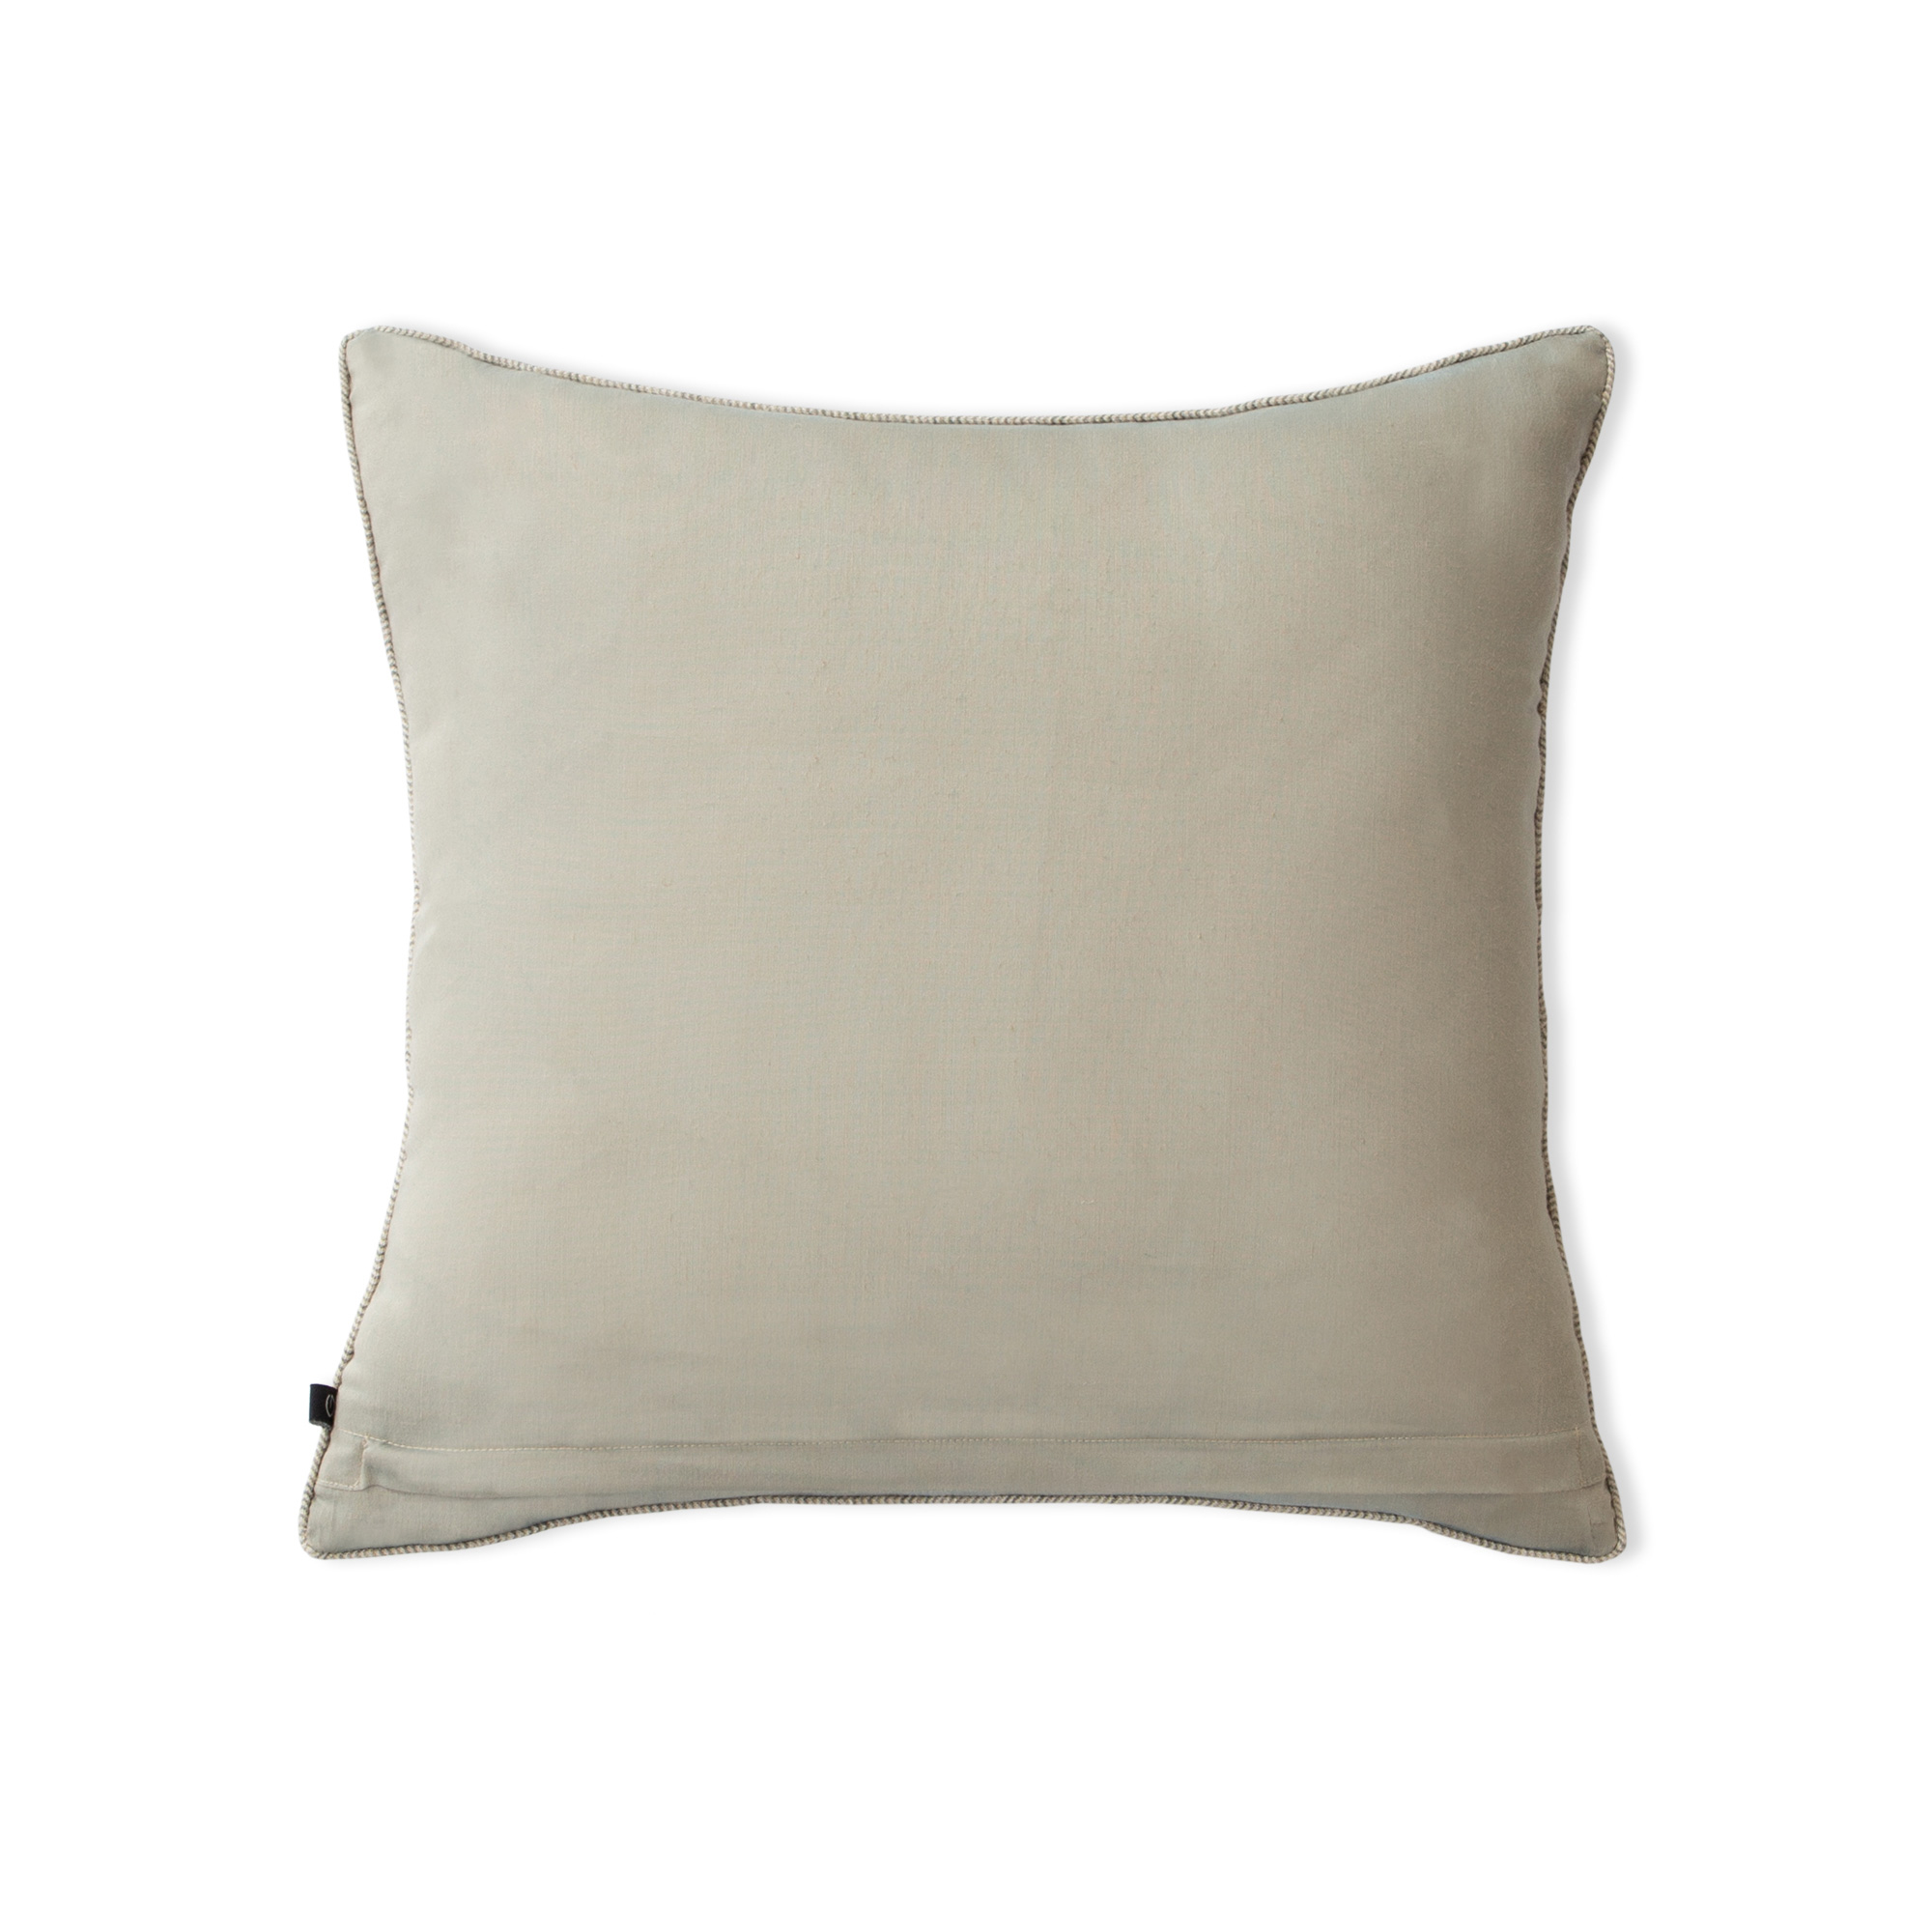 Perched Pelican Cushion Cover